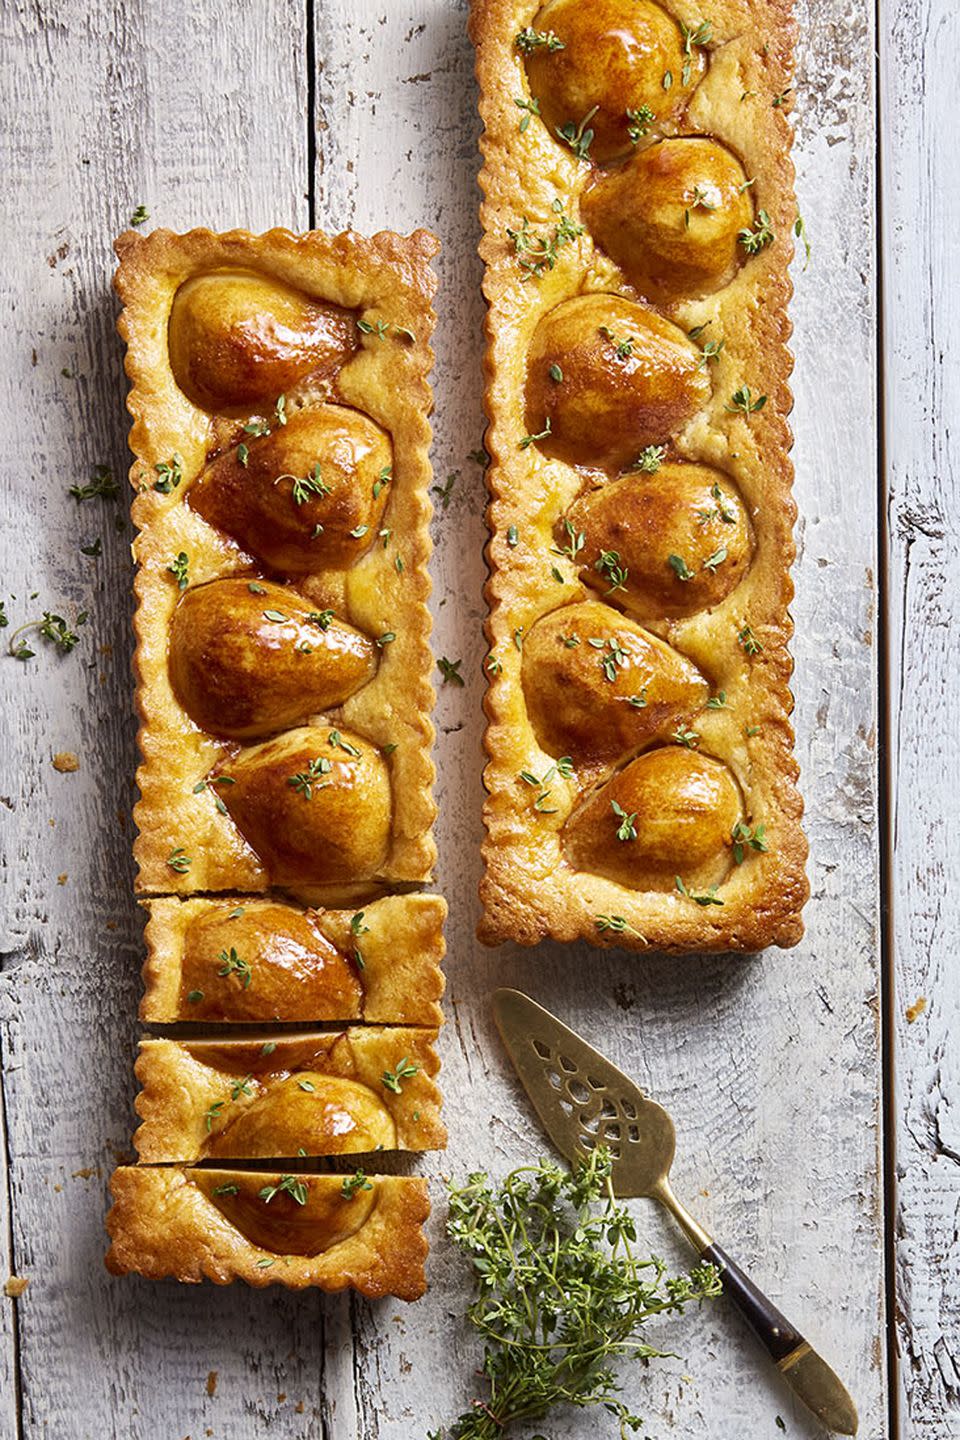 Lemon and Thyme Pear Tart With Apricot Glaze